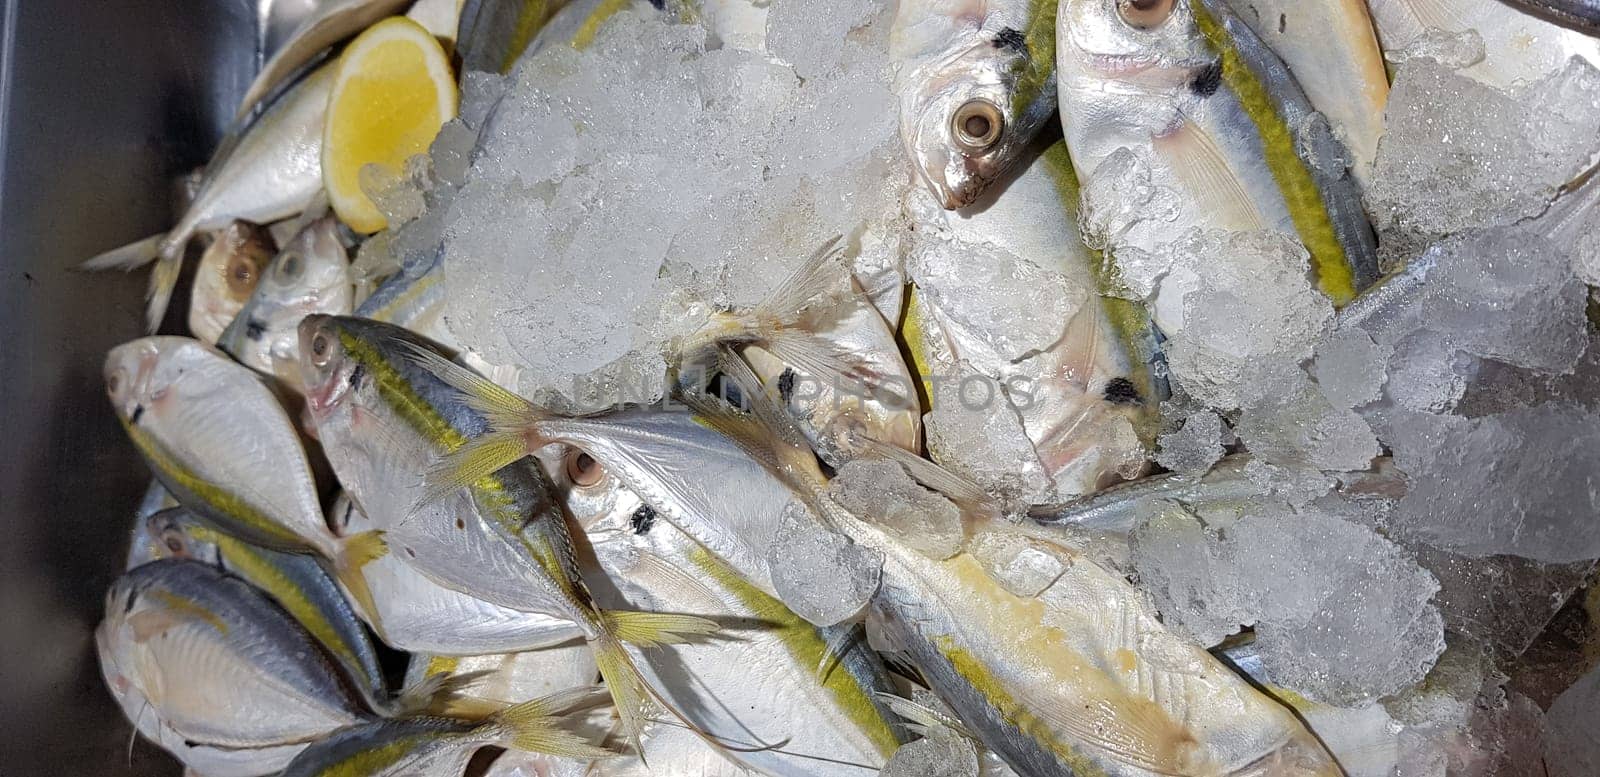 Ocean fresh fisheries product yellow stripe scad fish or yellow stripe trevally or yellow banded trevally, smooth tailed trevally, slender scaled trevally, slender trevally or selar kuning catch